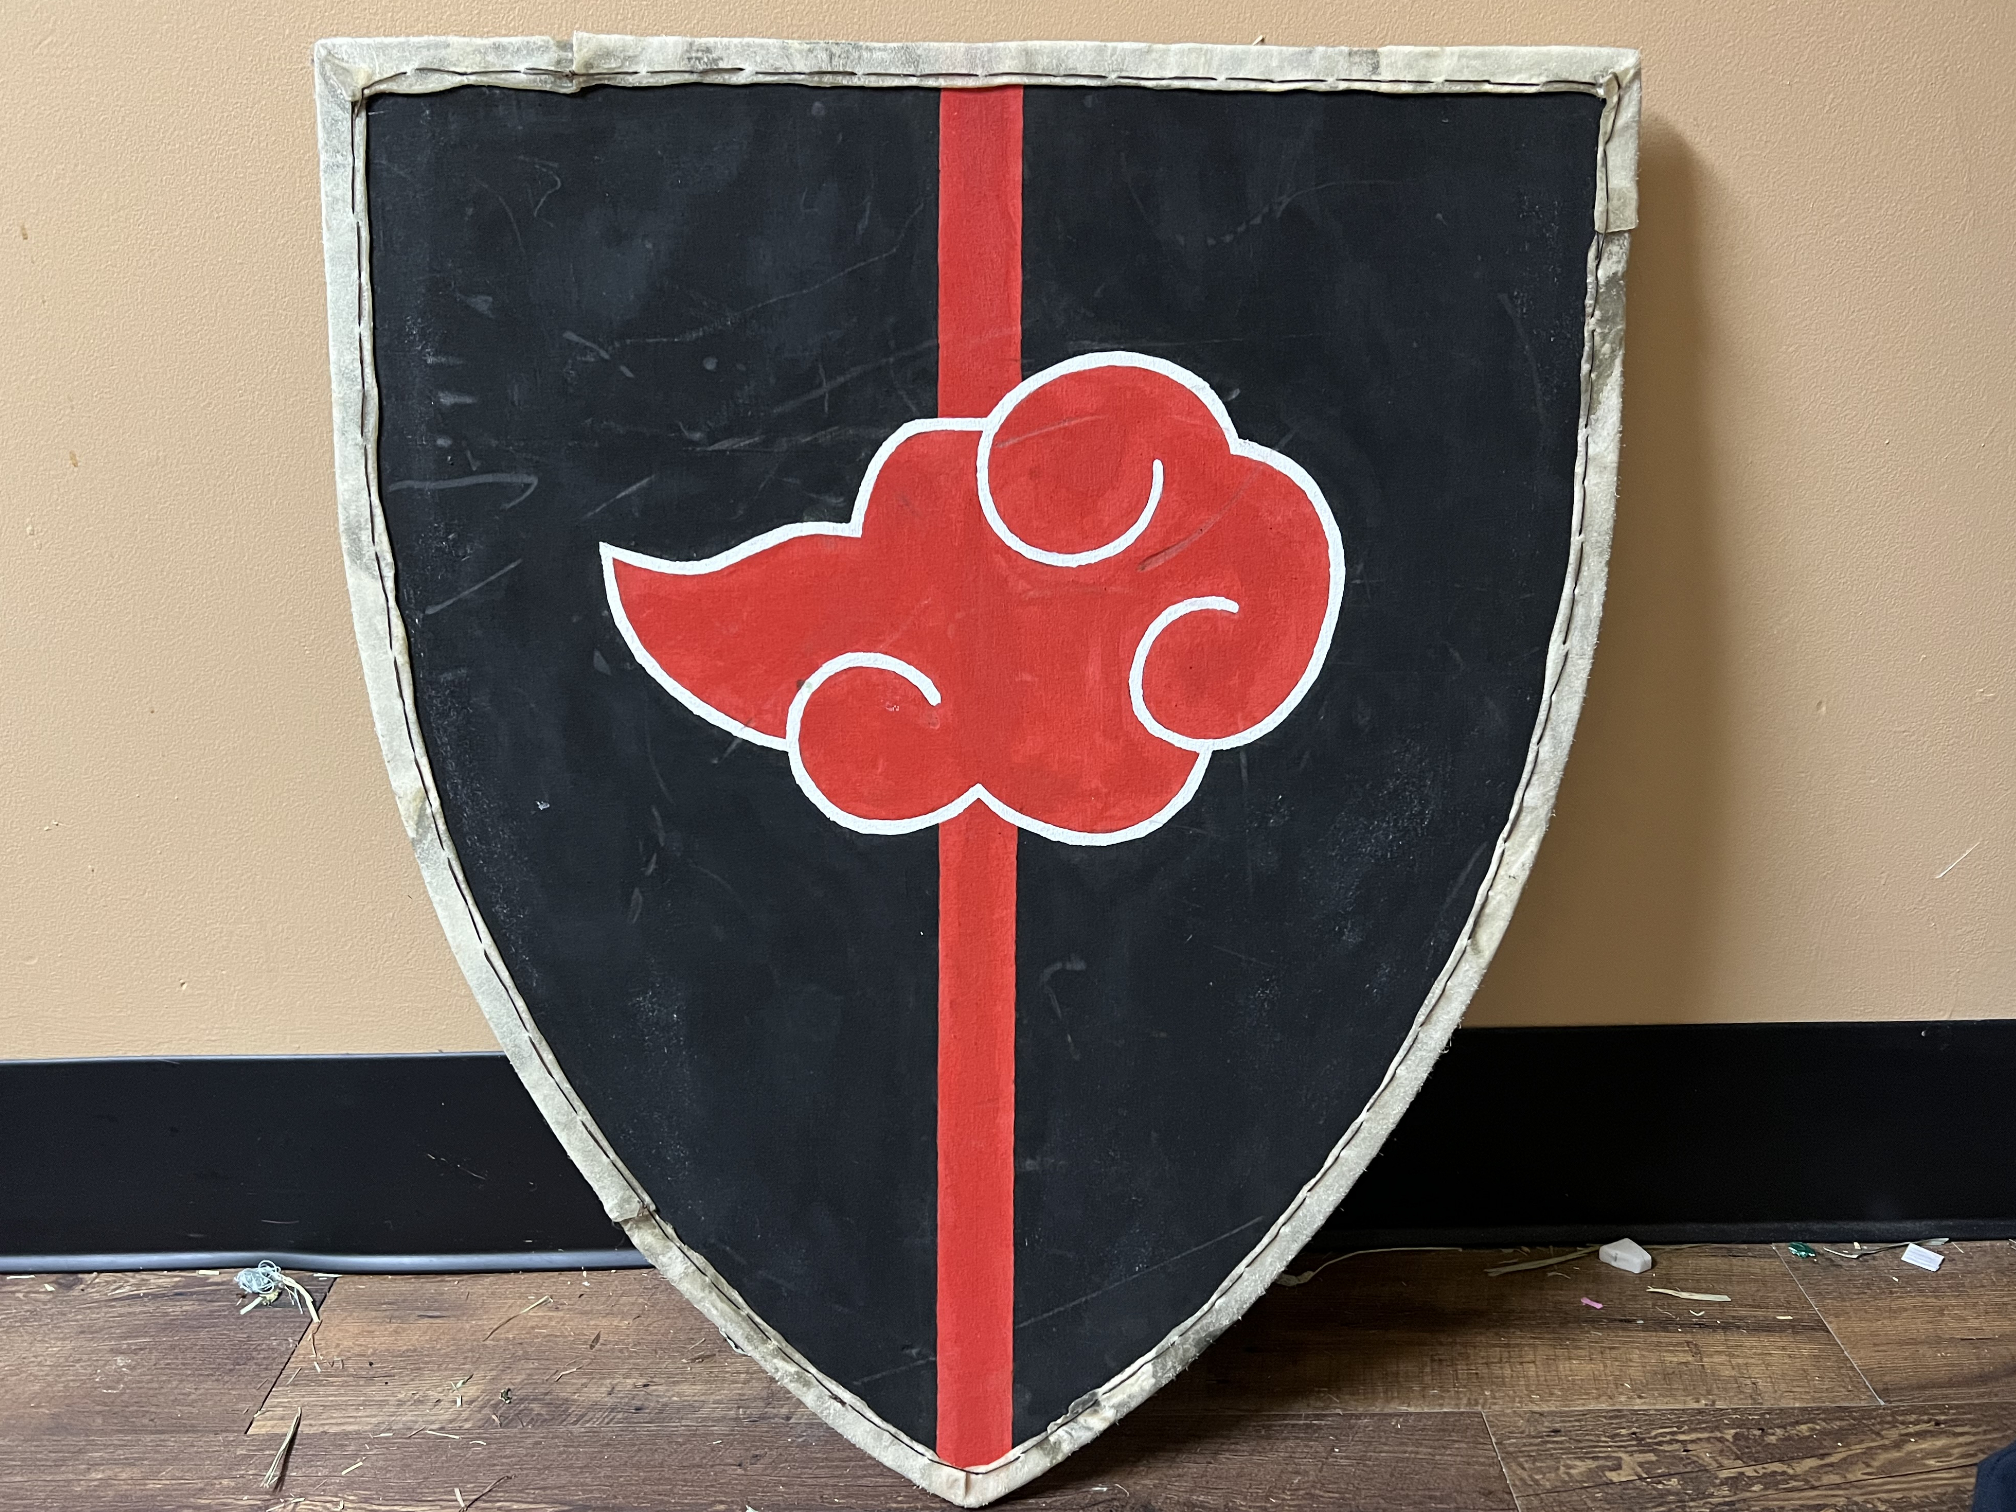 Black Shield with White Trim and Akatsuki Red Cloud Design on Black